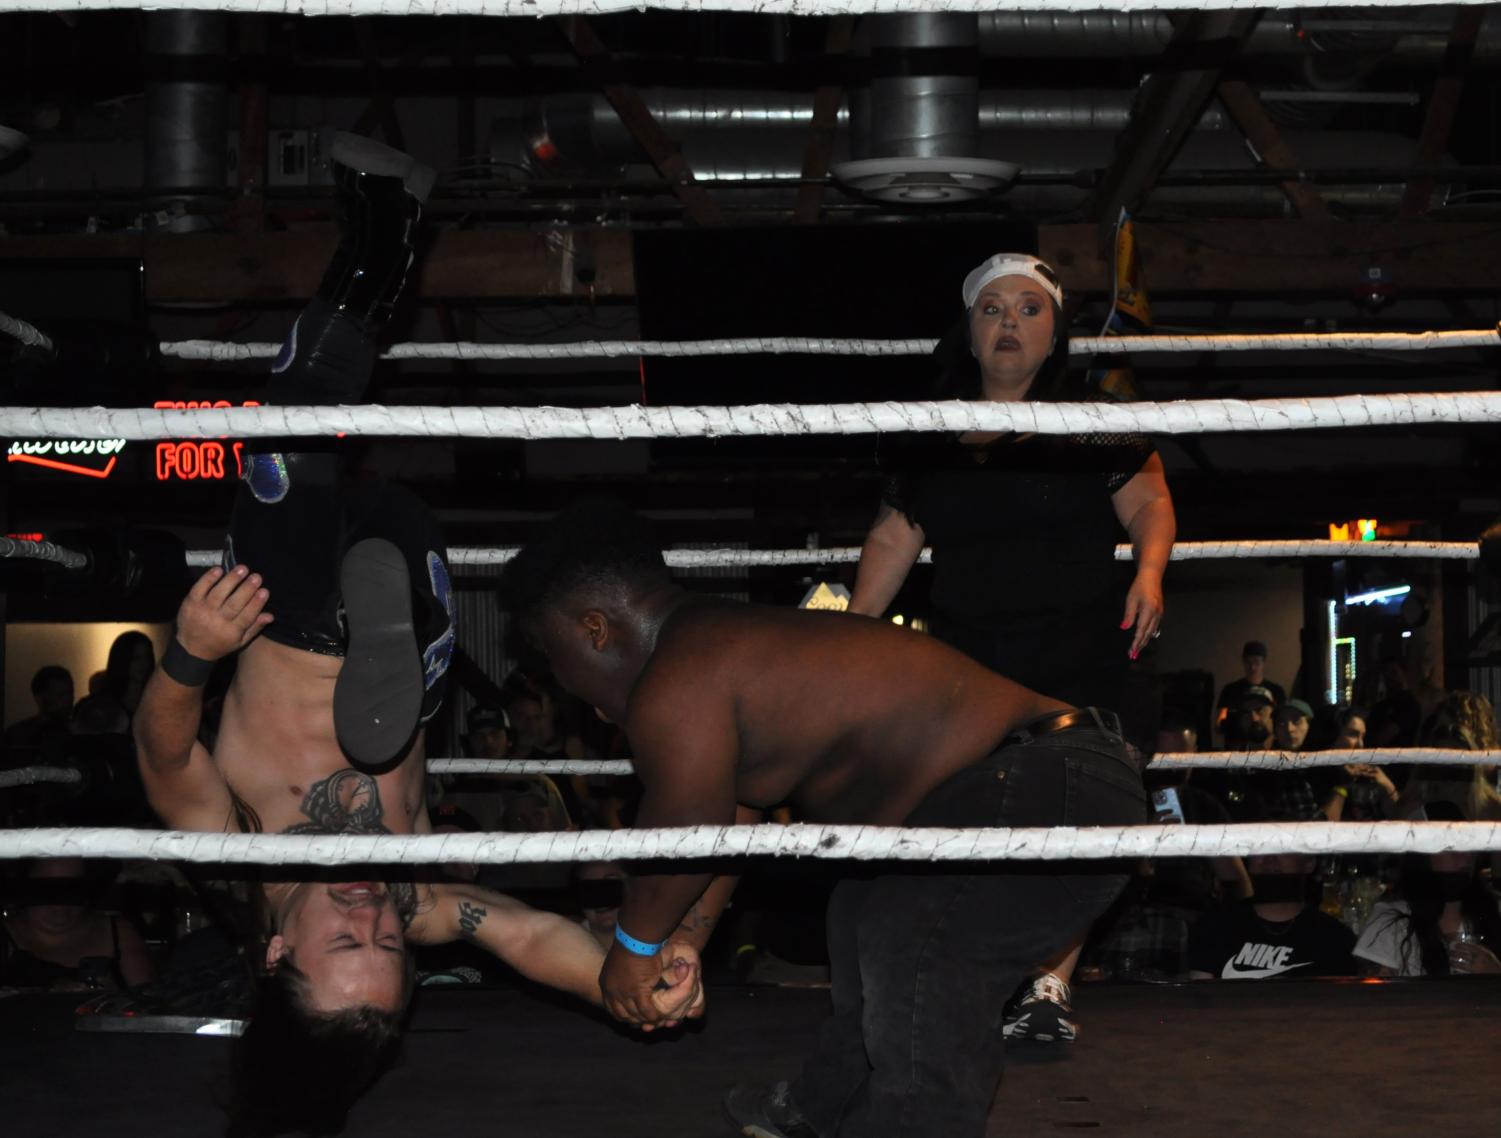 25 Cent flipping Dylan Michaels, and Tiffany Payne (referee). Photo taken by Mario Ortiz on June 17.